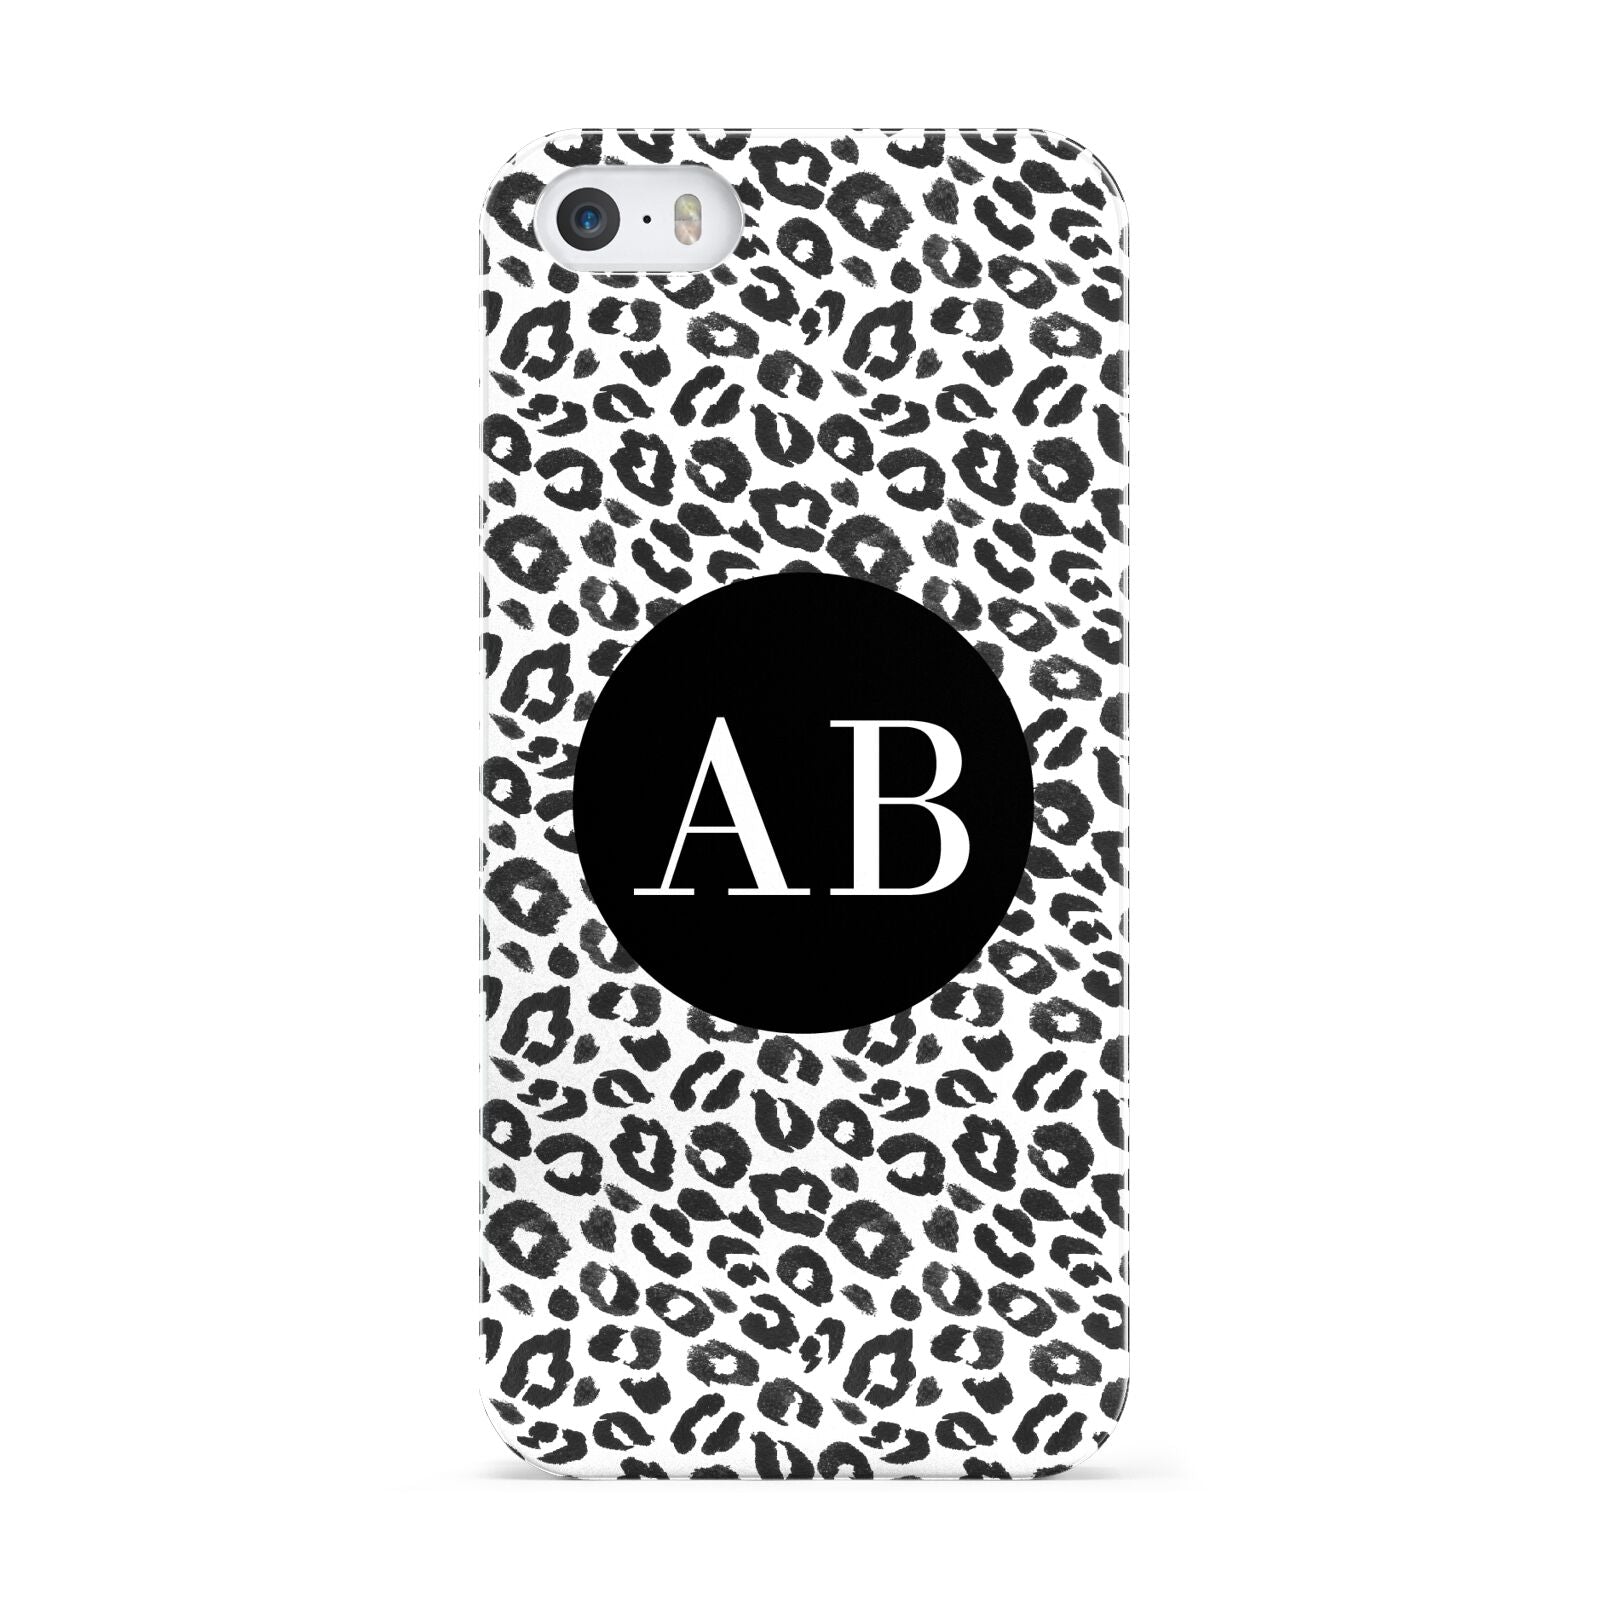 Leopard Print Black and White Apple iPhone 5 Case